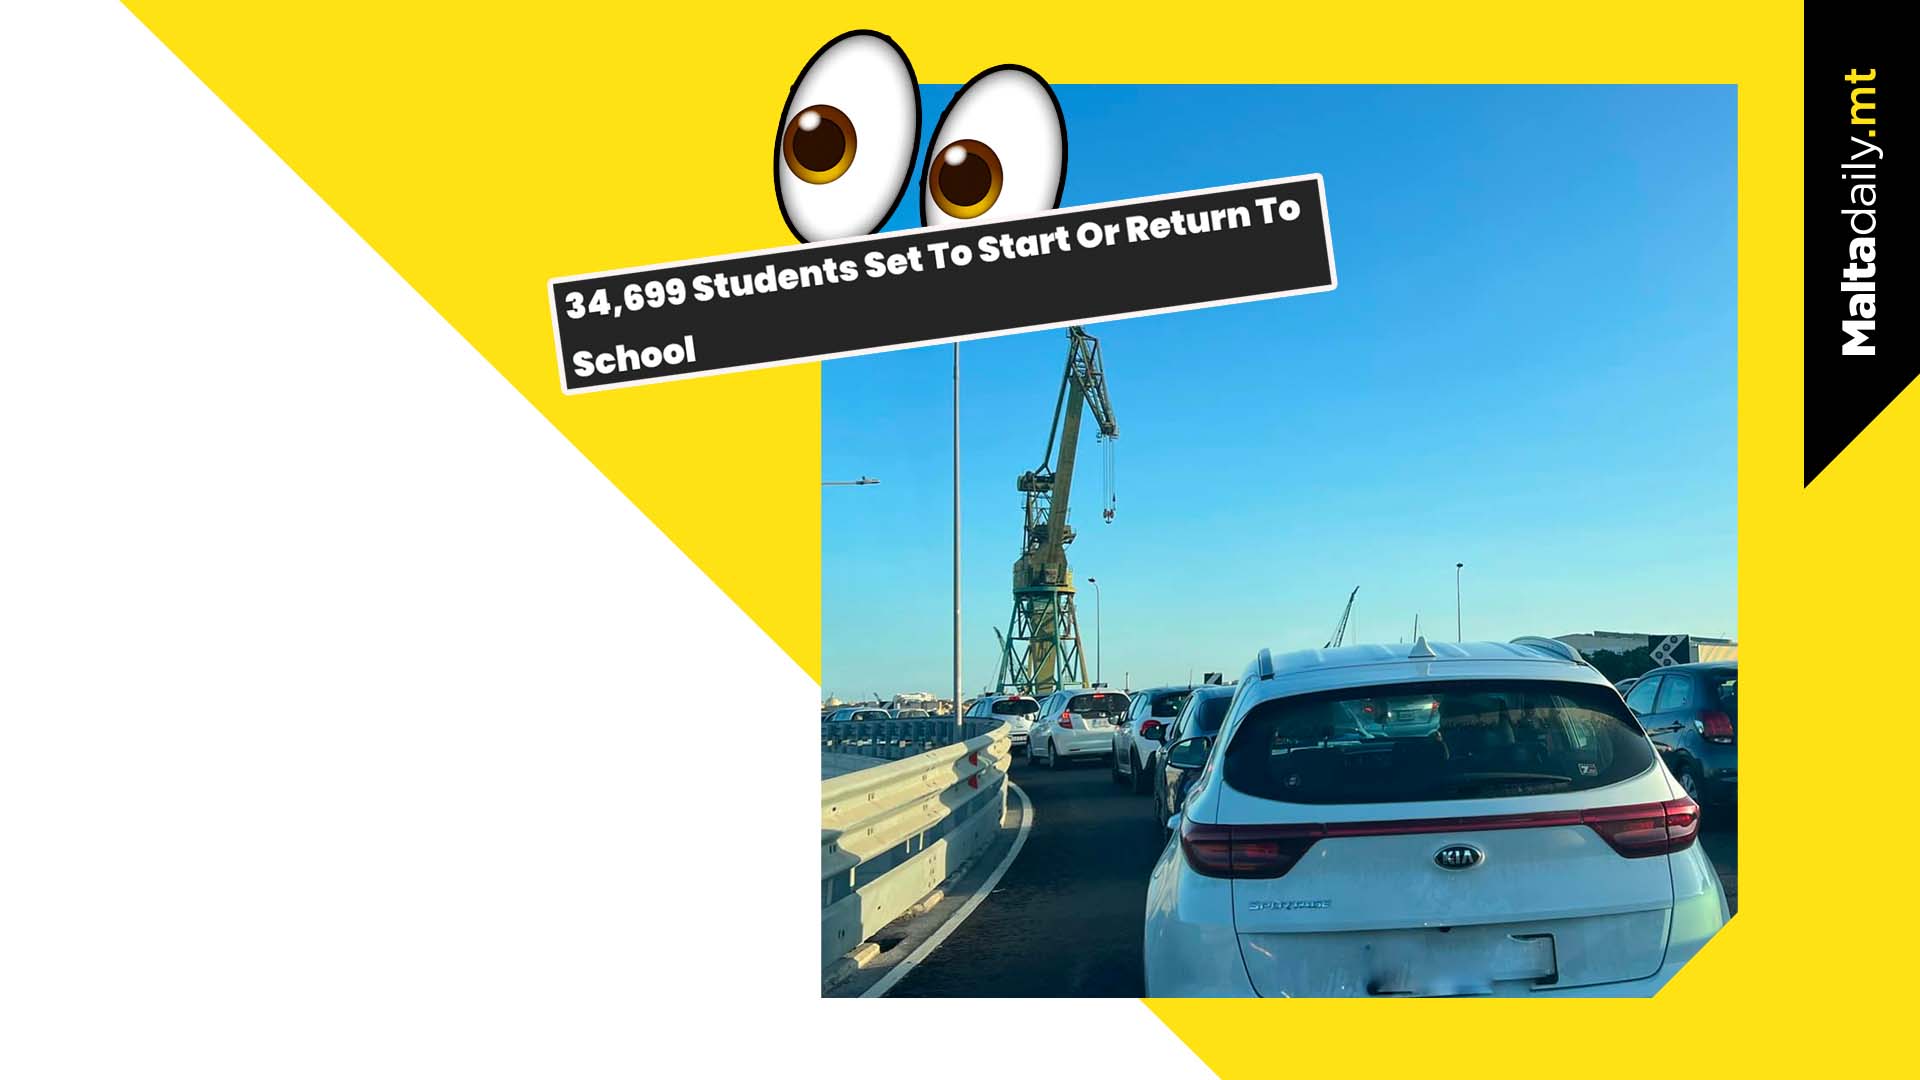 Heavy Traffic Reported Around Malta As Schools Reopen